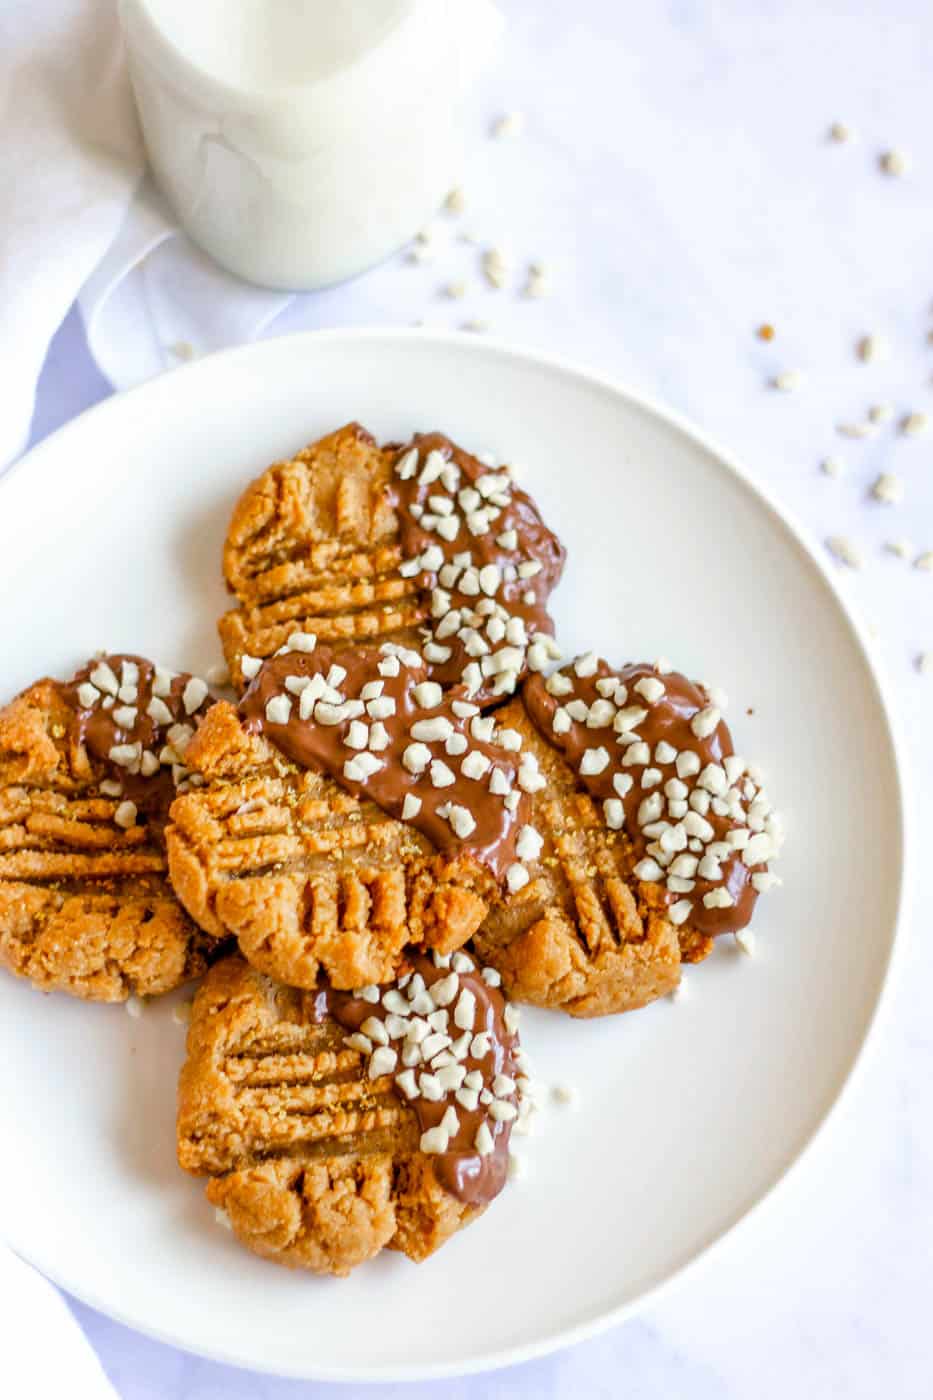 Keto Peanut Butter Cookies dipped in c،colate and nuts, on white plate